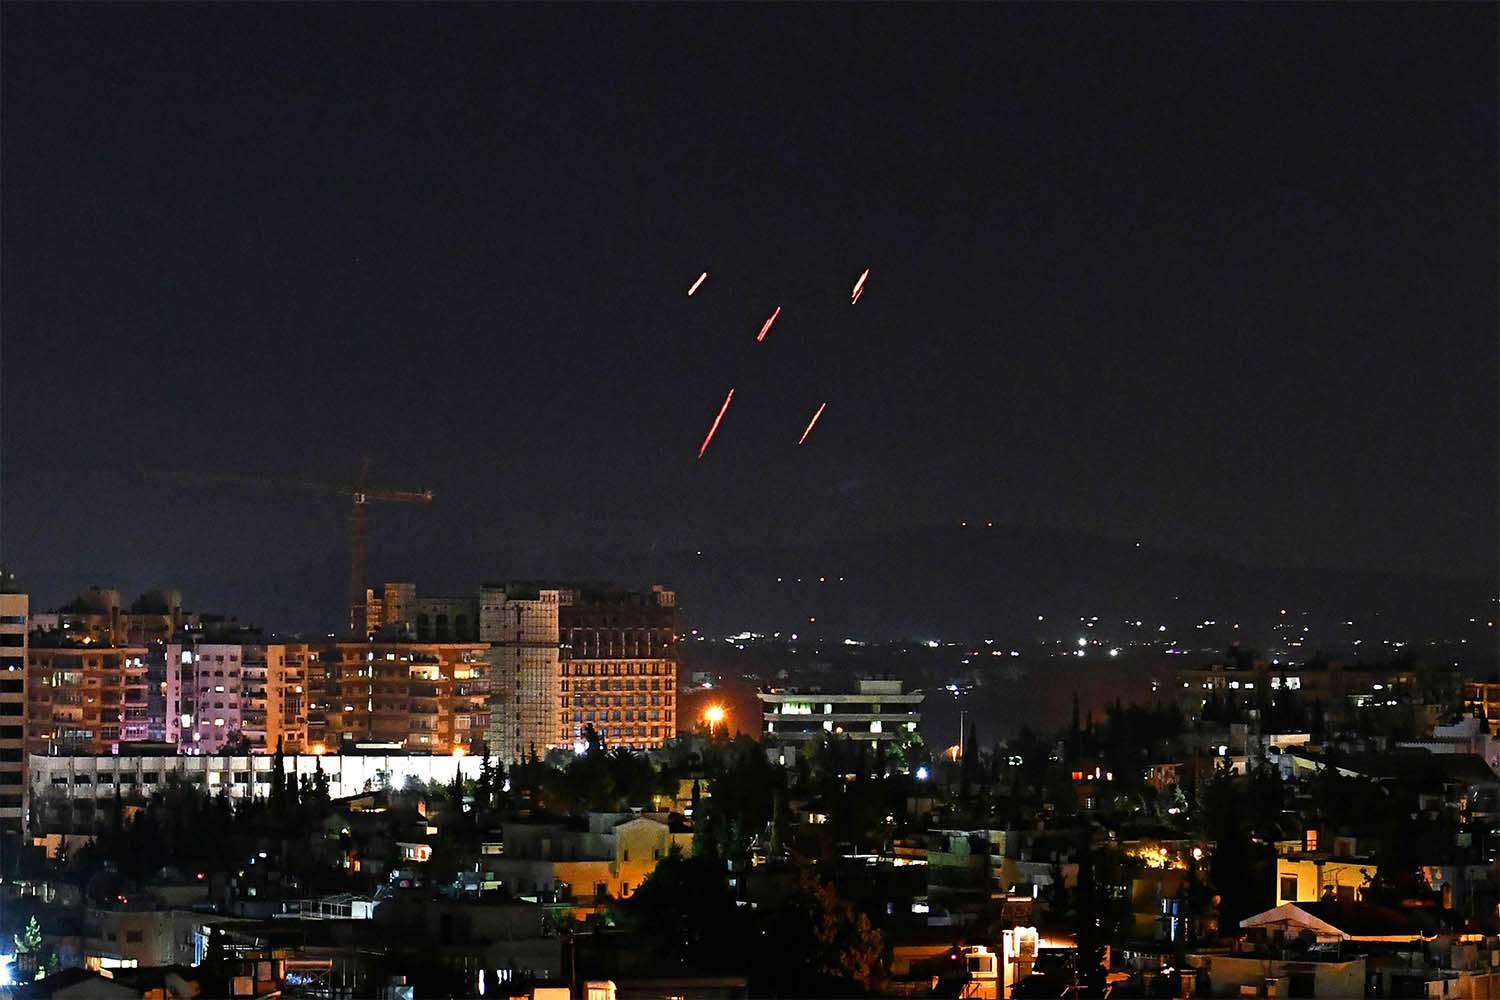 Israel’s stepped-up strikes on Syria since last year are part of a shadow war approved by the US